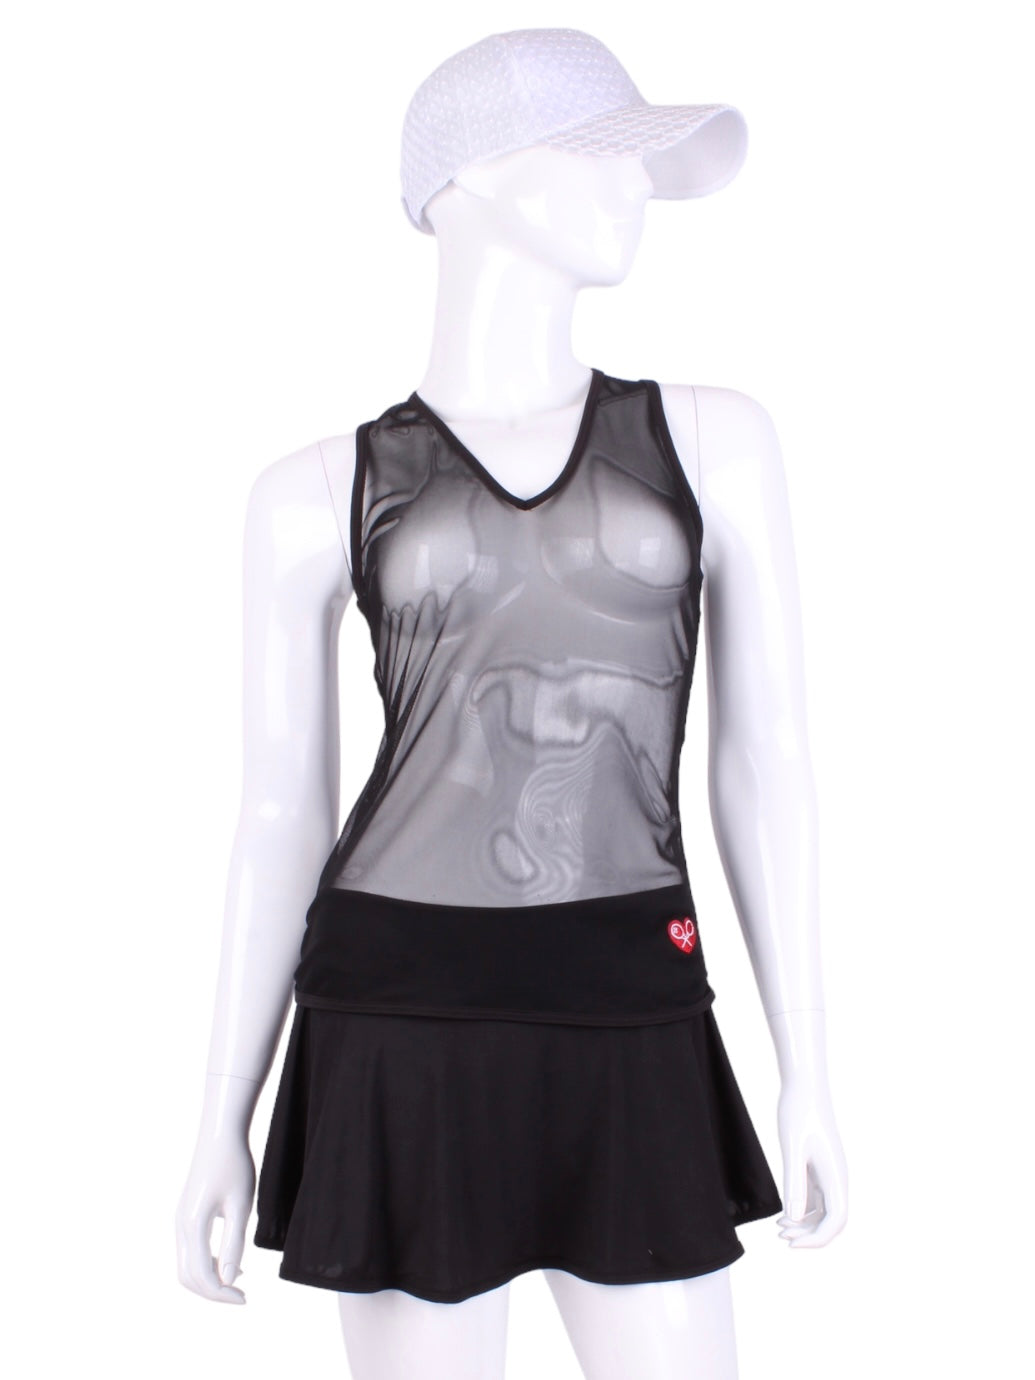 Straight Back Vee Tank Black All Mesh. The simply elegant Vee Tank has a little vee in the front and a straight back.  Designed by a tennis player for comfort AND luxury - the pattern is made for a real woman’s body with curves and all!  The material is stretchy and soft.  As with all of our apparel - it’s designed and hand made in Downtown Los Angeles - from imported fabric.